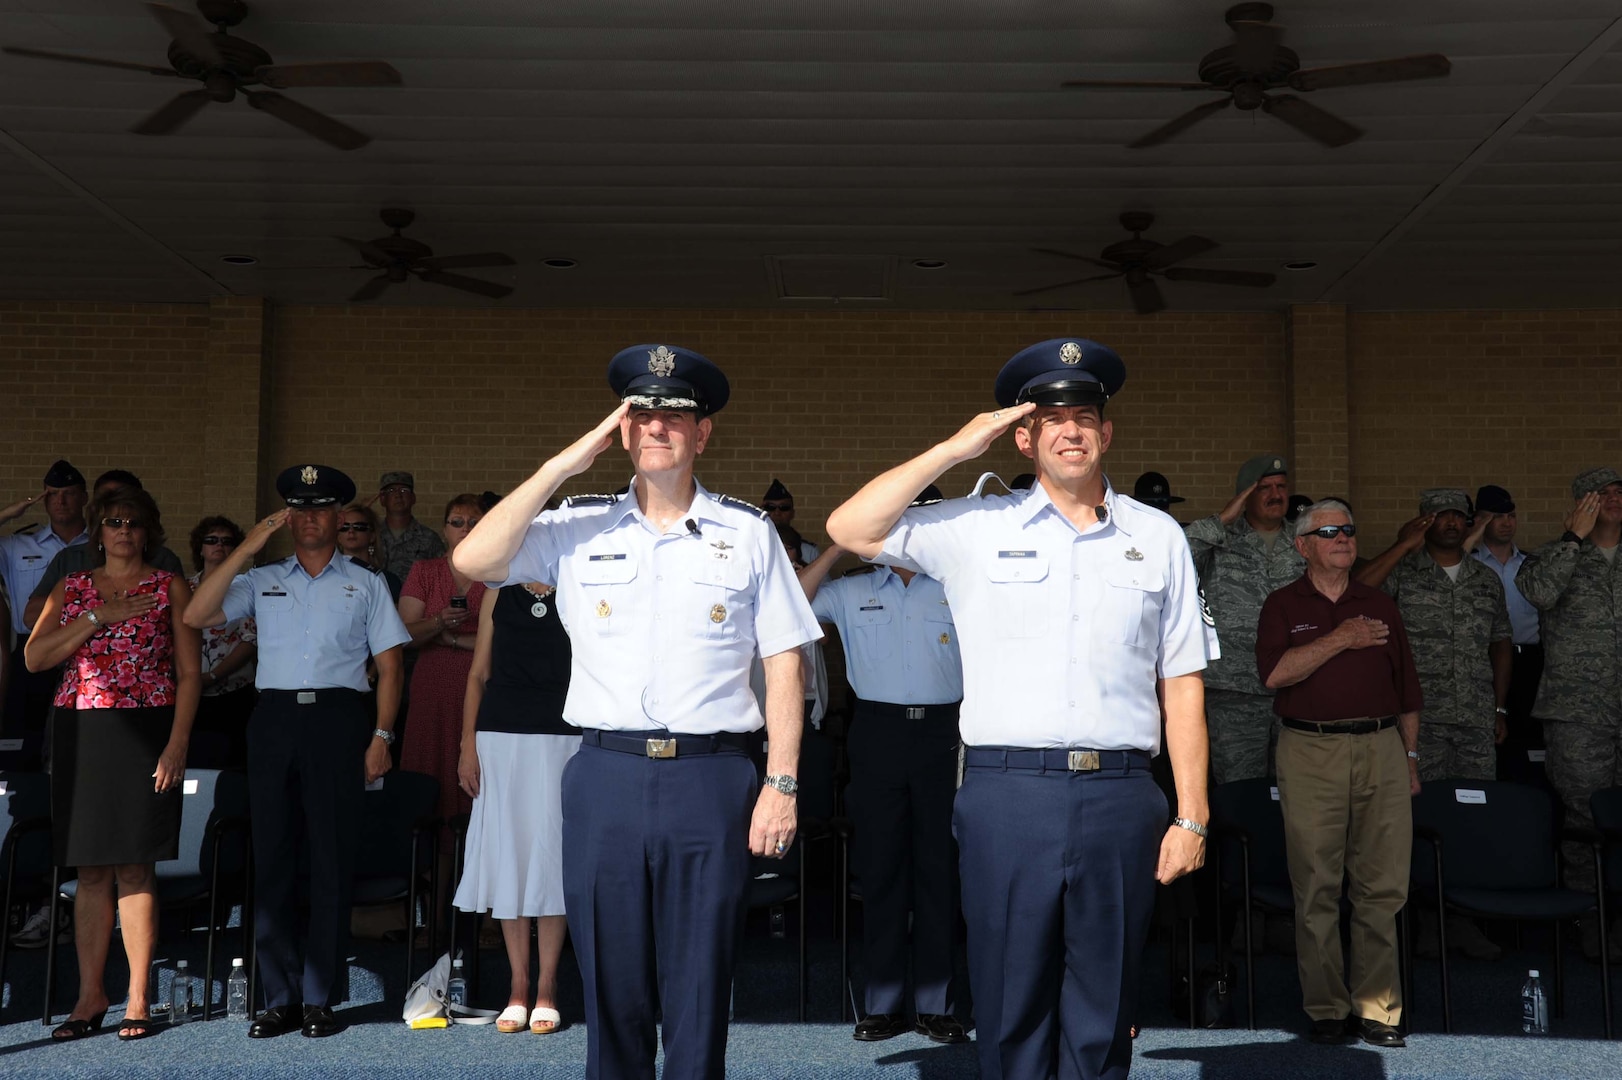 Gen. Stephen Lorenz (left), AETC commander and Chief Master Sgt. Robert Tappana (right), AETC command chief, salute during the national anthem during basic military training graduation at Lackland AFB, Texas Aug. 13.  This was chief’s last ceremony as he retired Aug 13 at Randolph AFB, TX. (U.S. Air Force photo/Alan Boedeker)